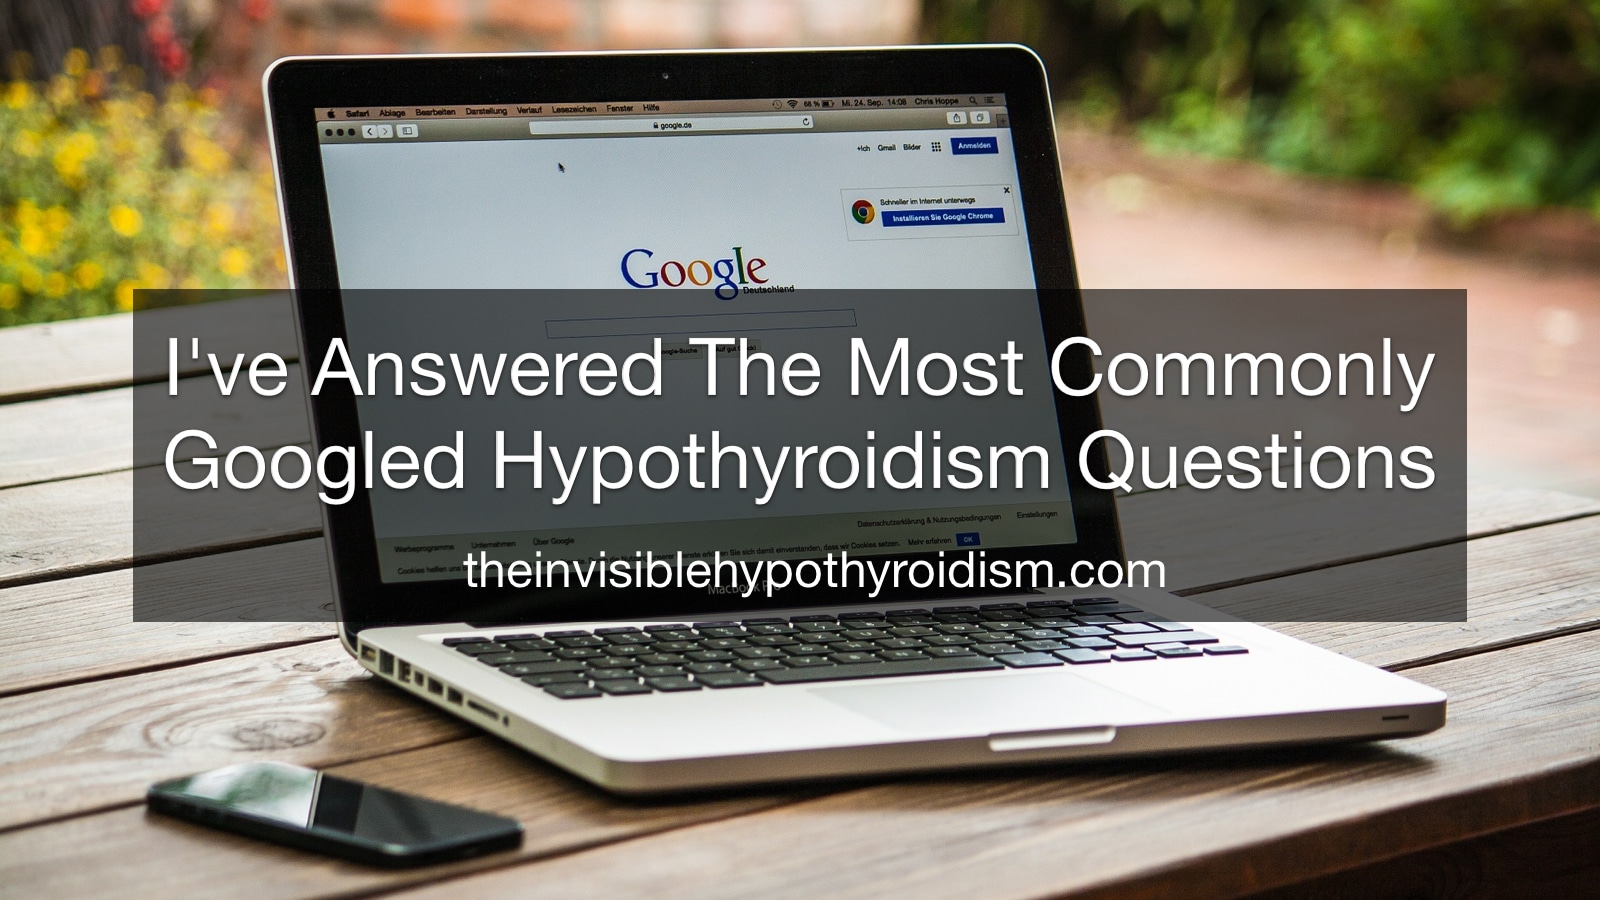 I've Answered The Most Commonly Googled Hypothyroidism Questions